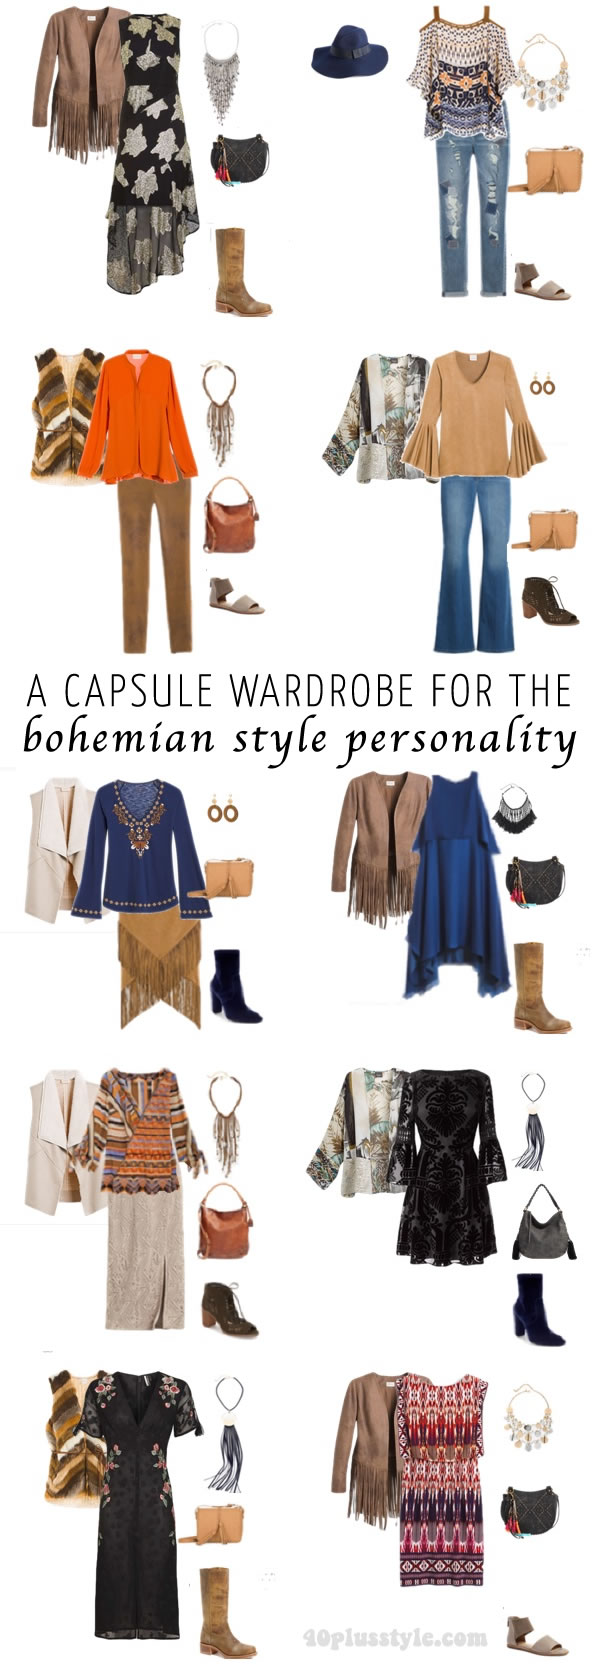 A capsule wardrobe for the bohemian style personality